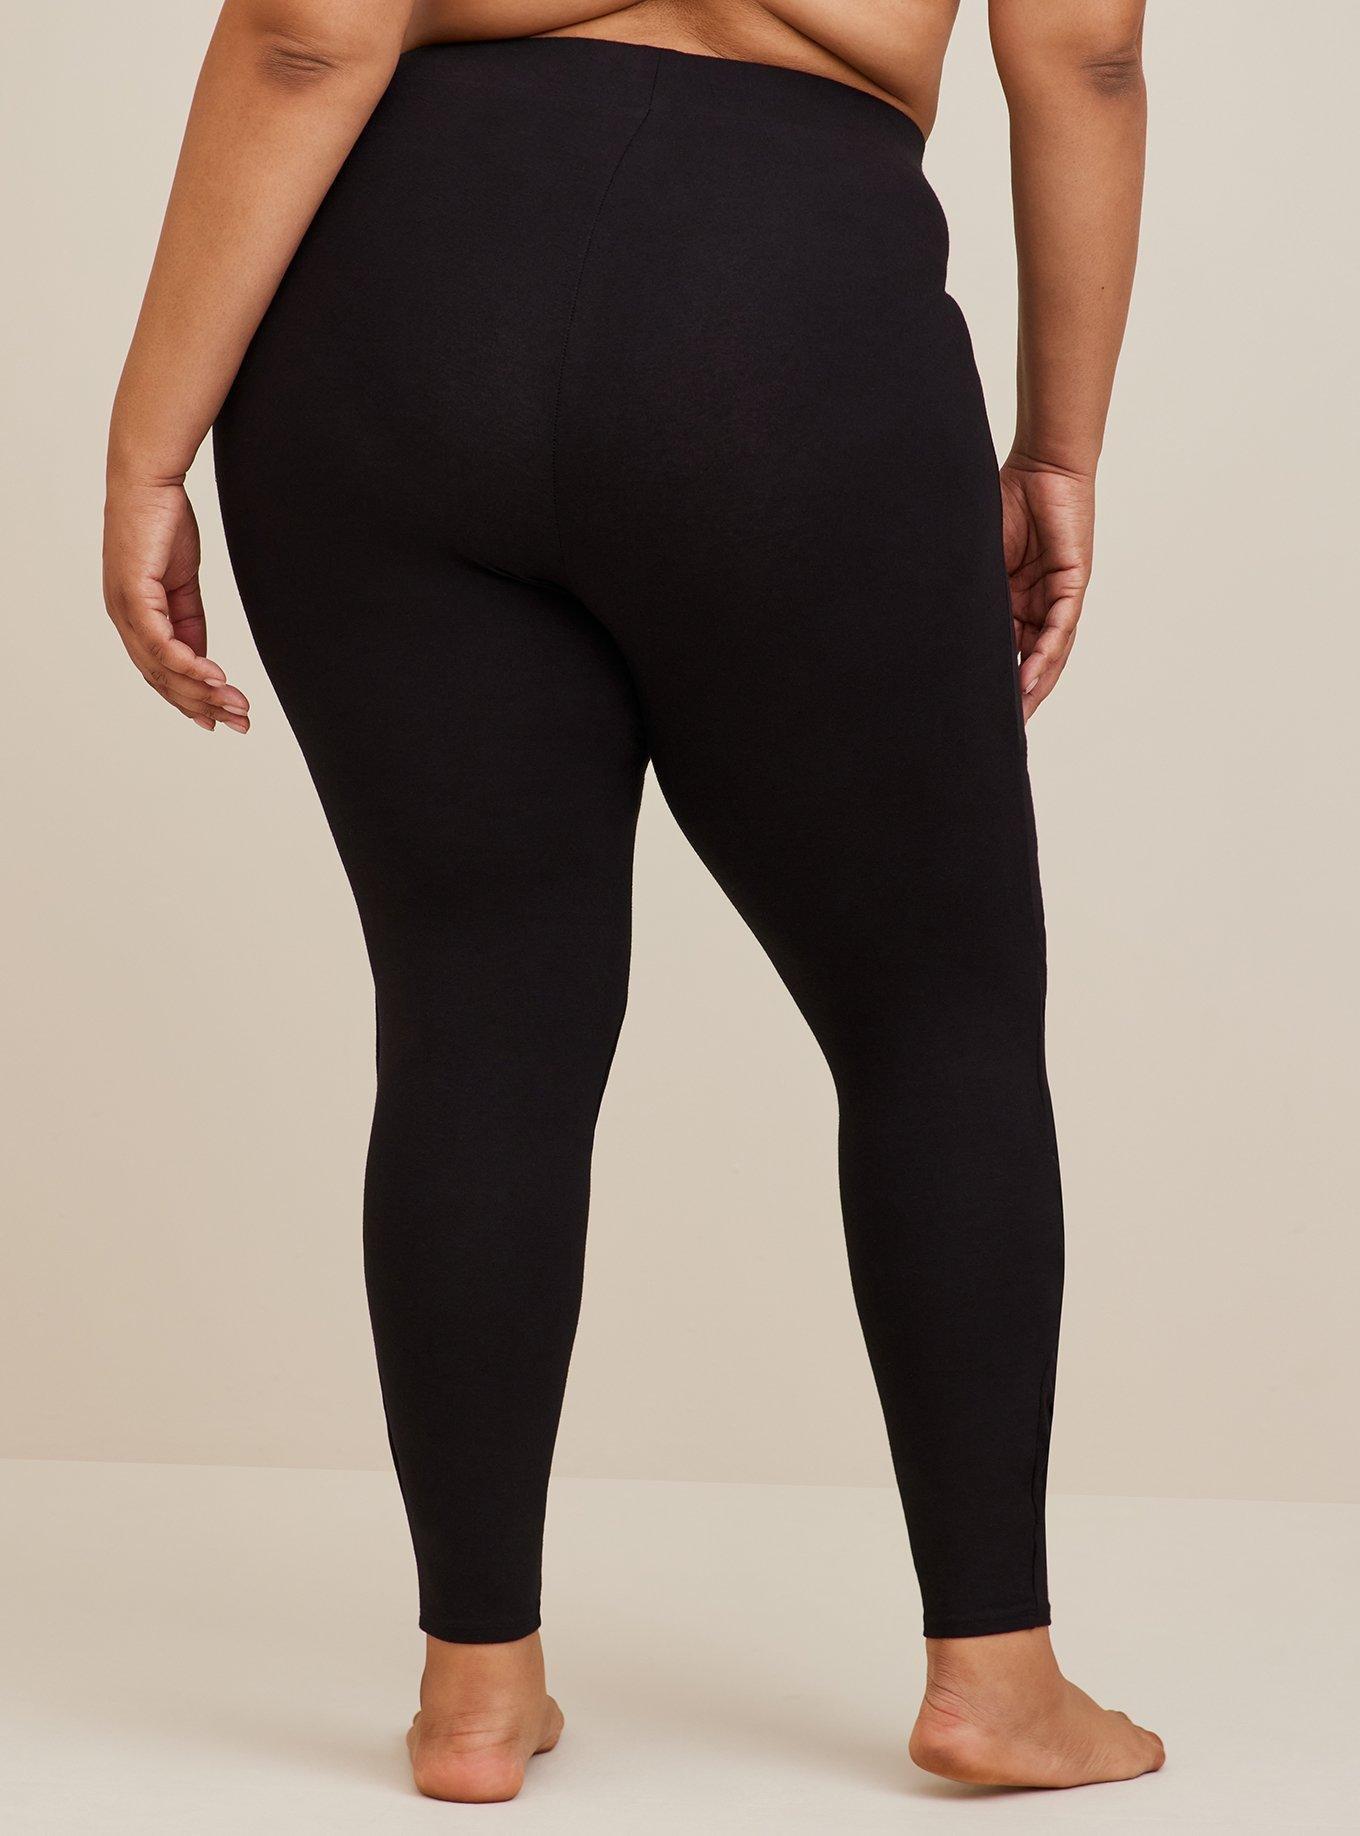 View our wide range of women's leggings